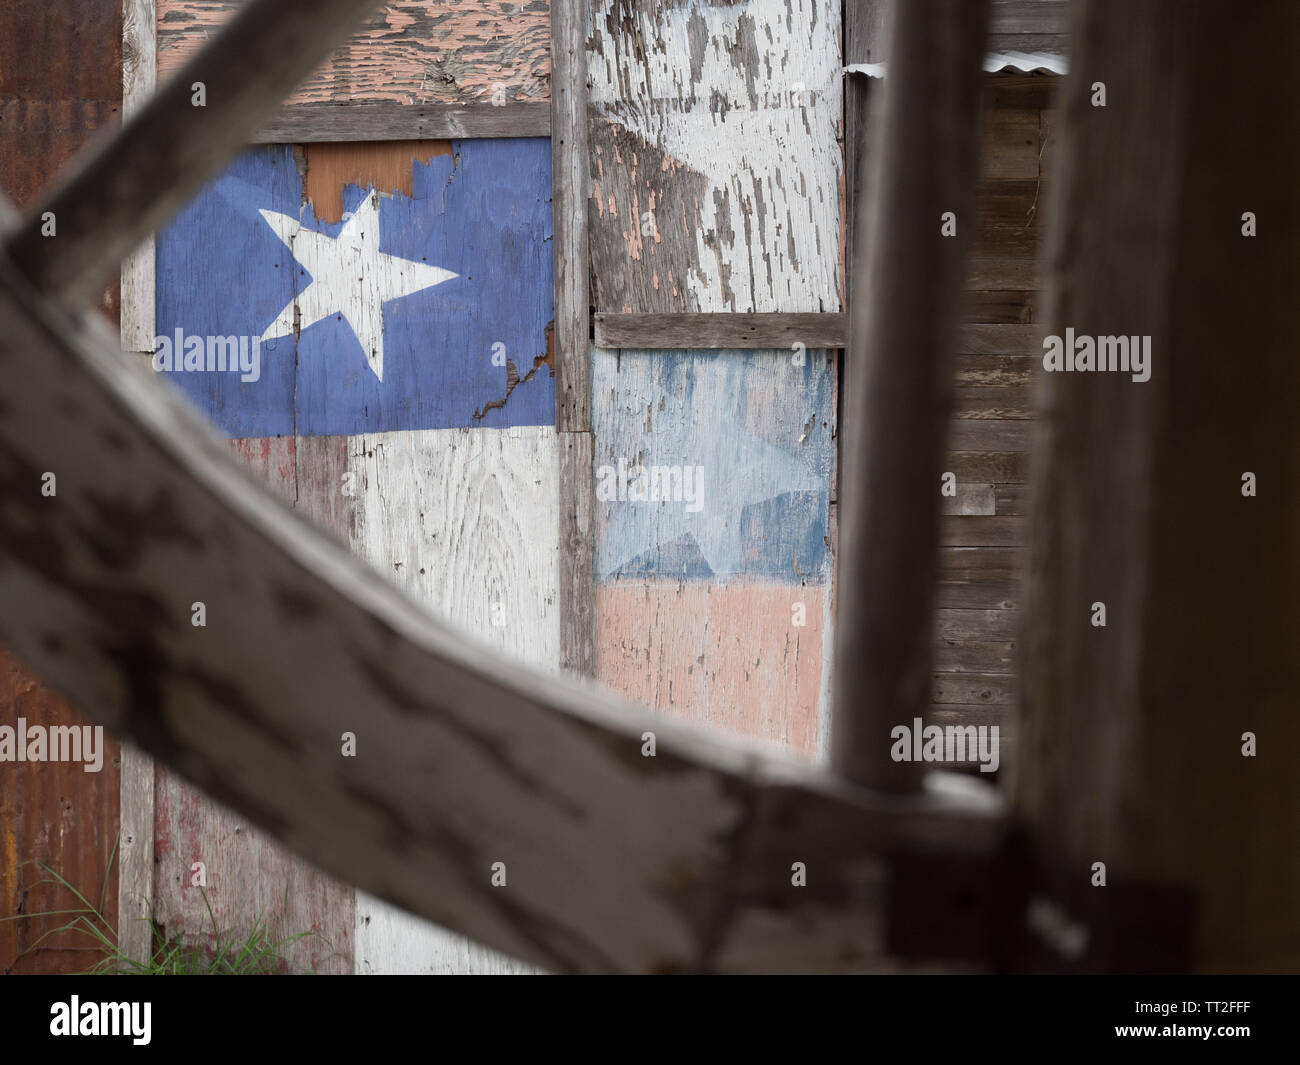 Faded Texas flag painted on the side of an old building in the ghost town of Loraine, Texas Stock Photo